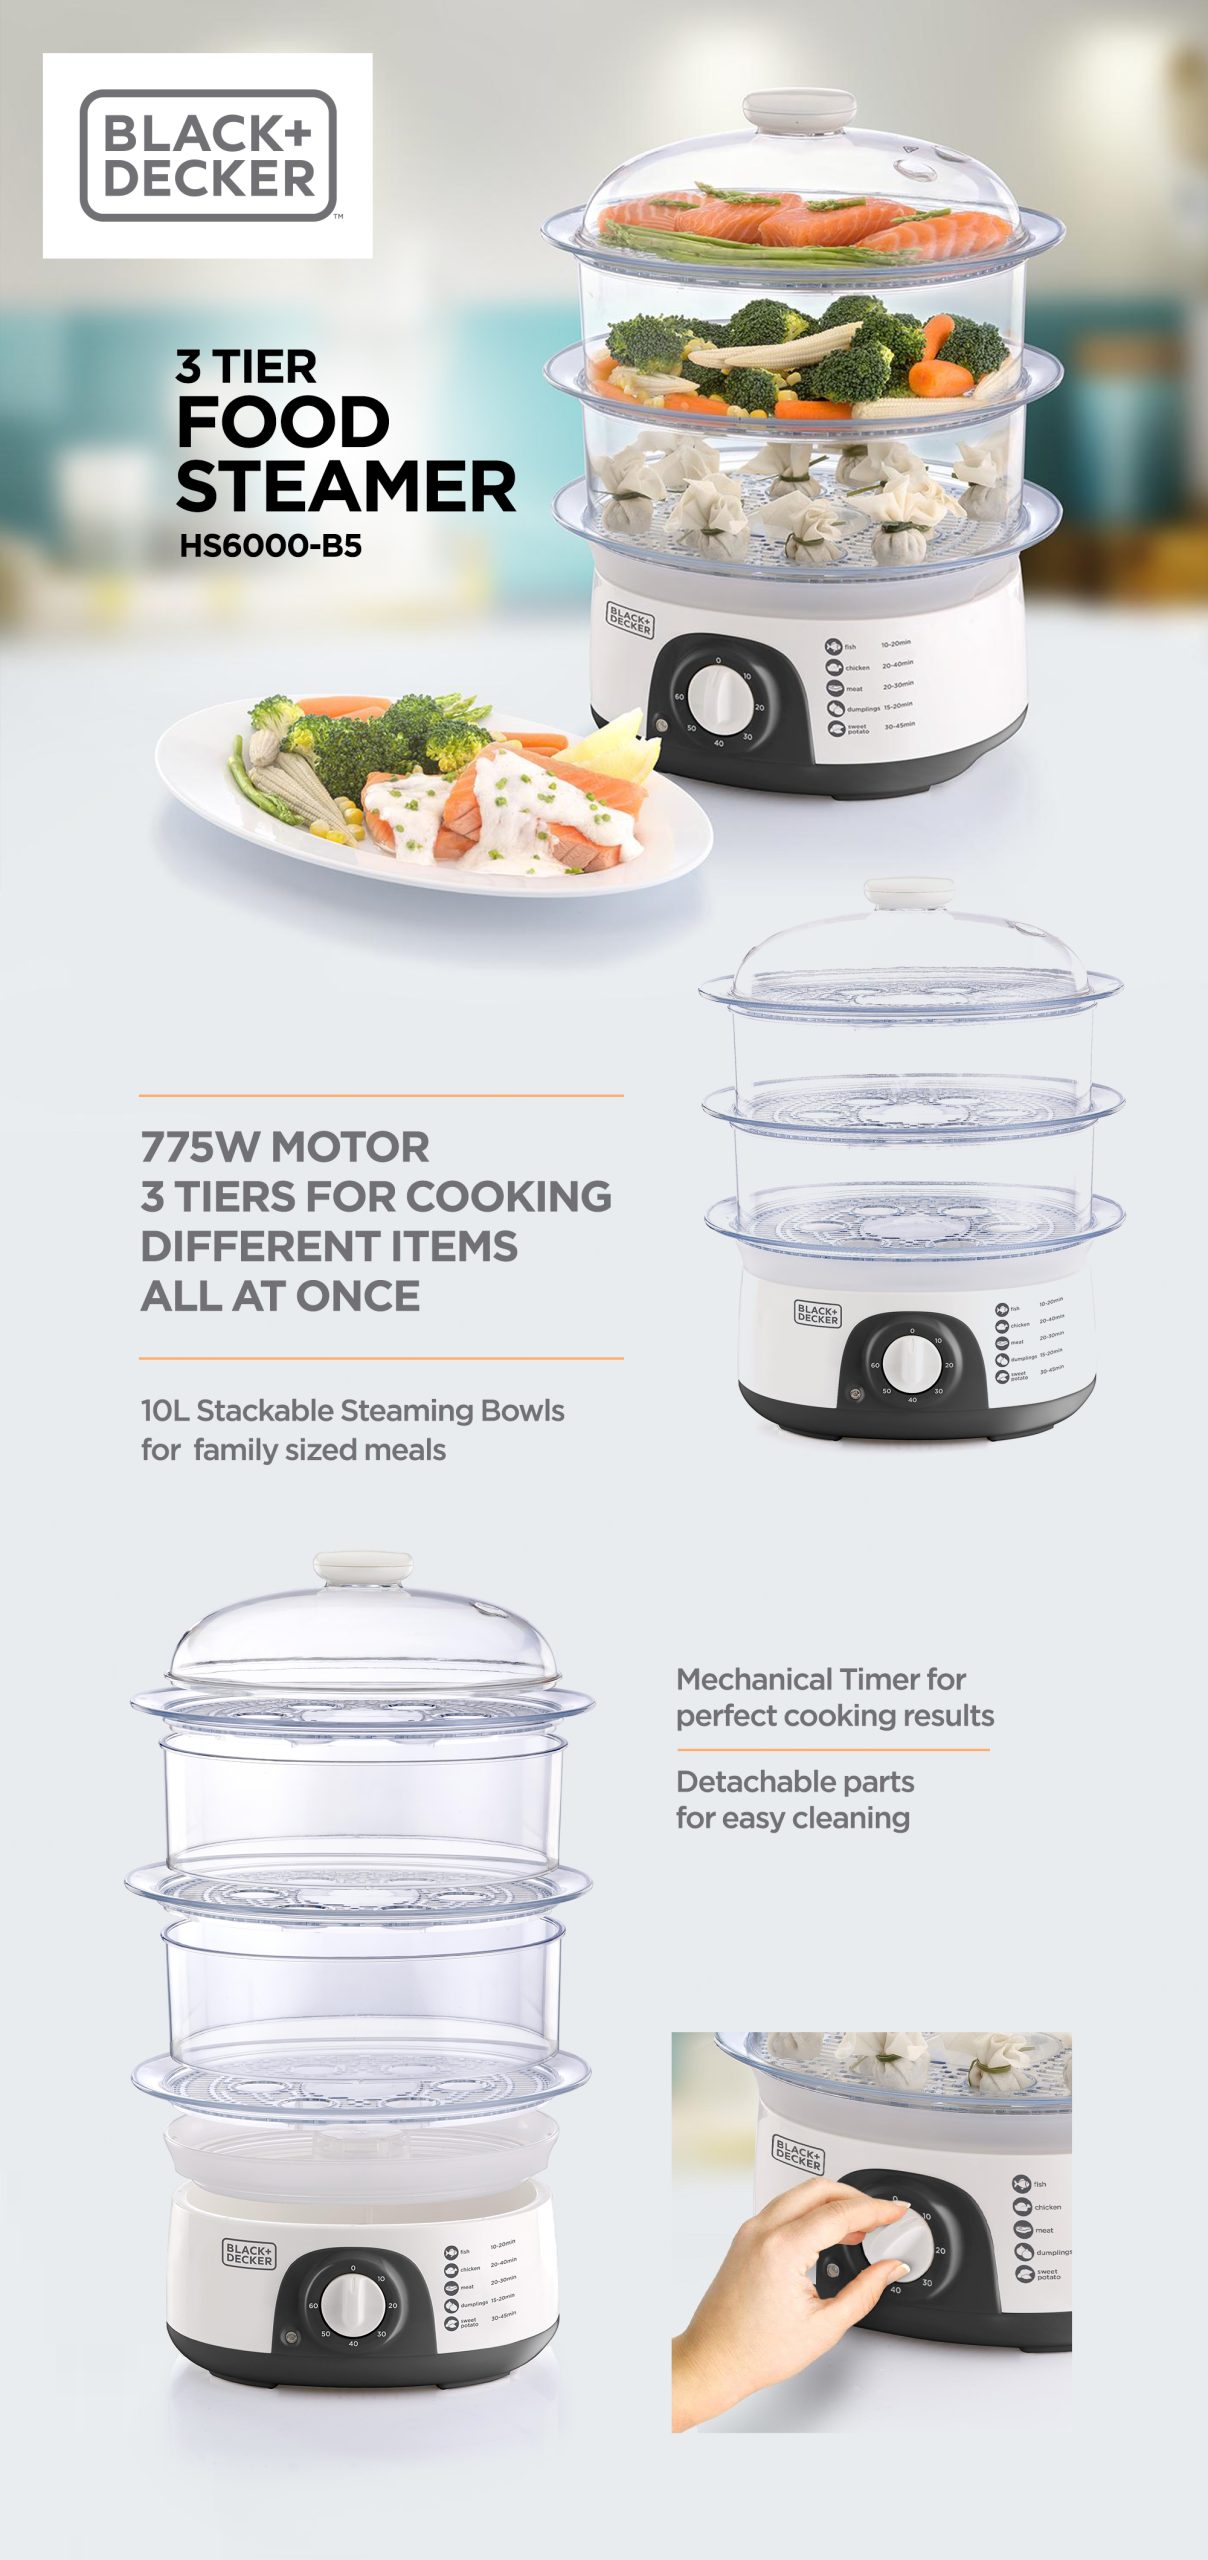 Beytech - Choose the Black+Decker HS6000 B5 3 Tier Food Steamer that allows  you to prepare lip smacking dishes for your family and friends. It features  stackable steaming bowls with a capacity